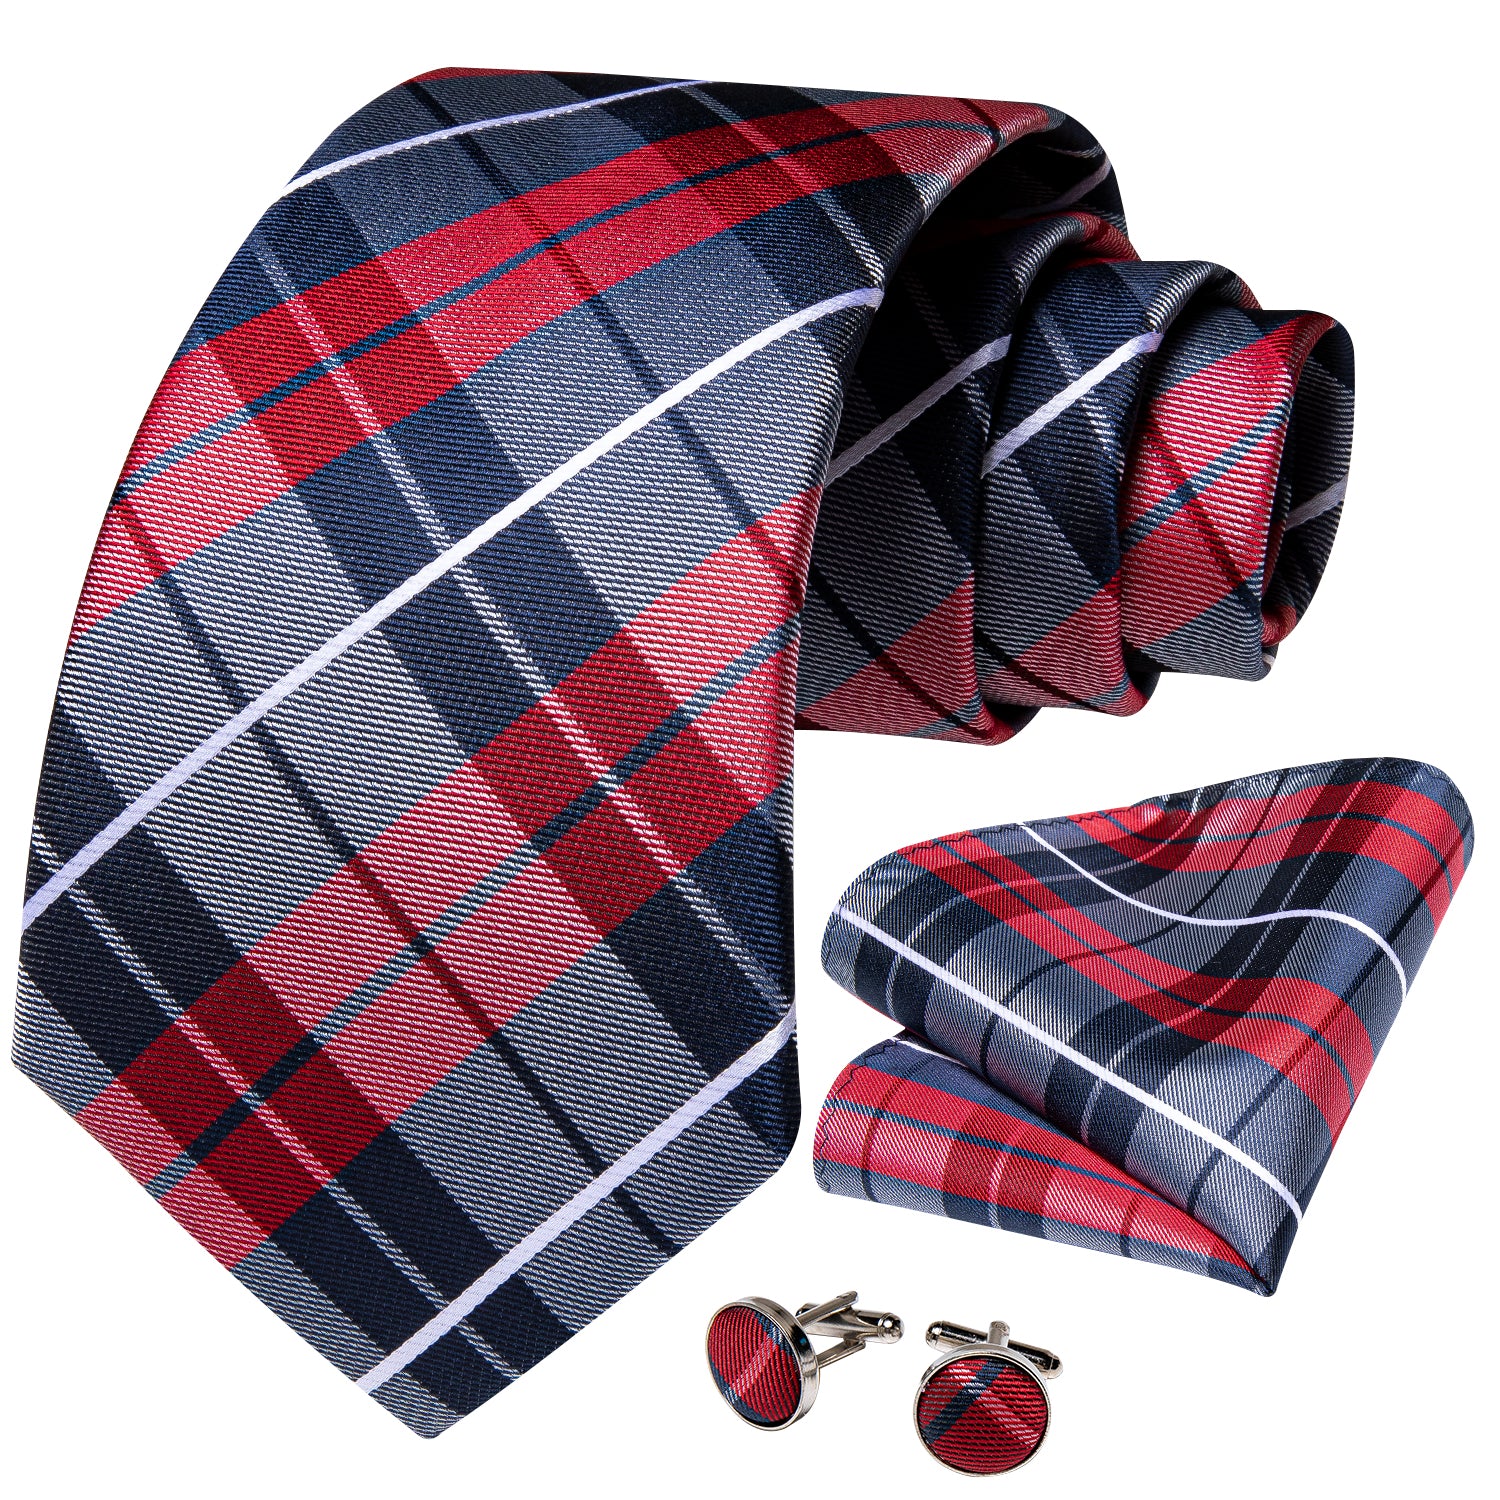 Classic Campus Style Blue Red Plaid Tie Pocket Square Cufflinks Set